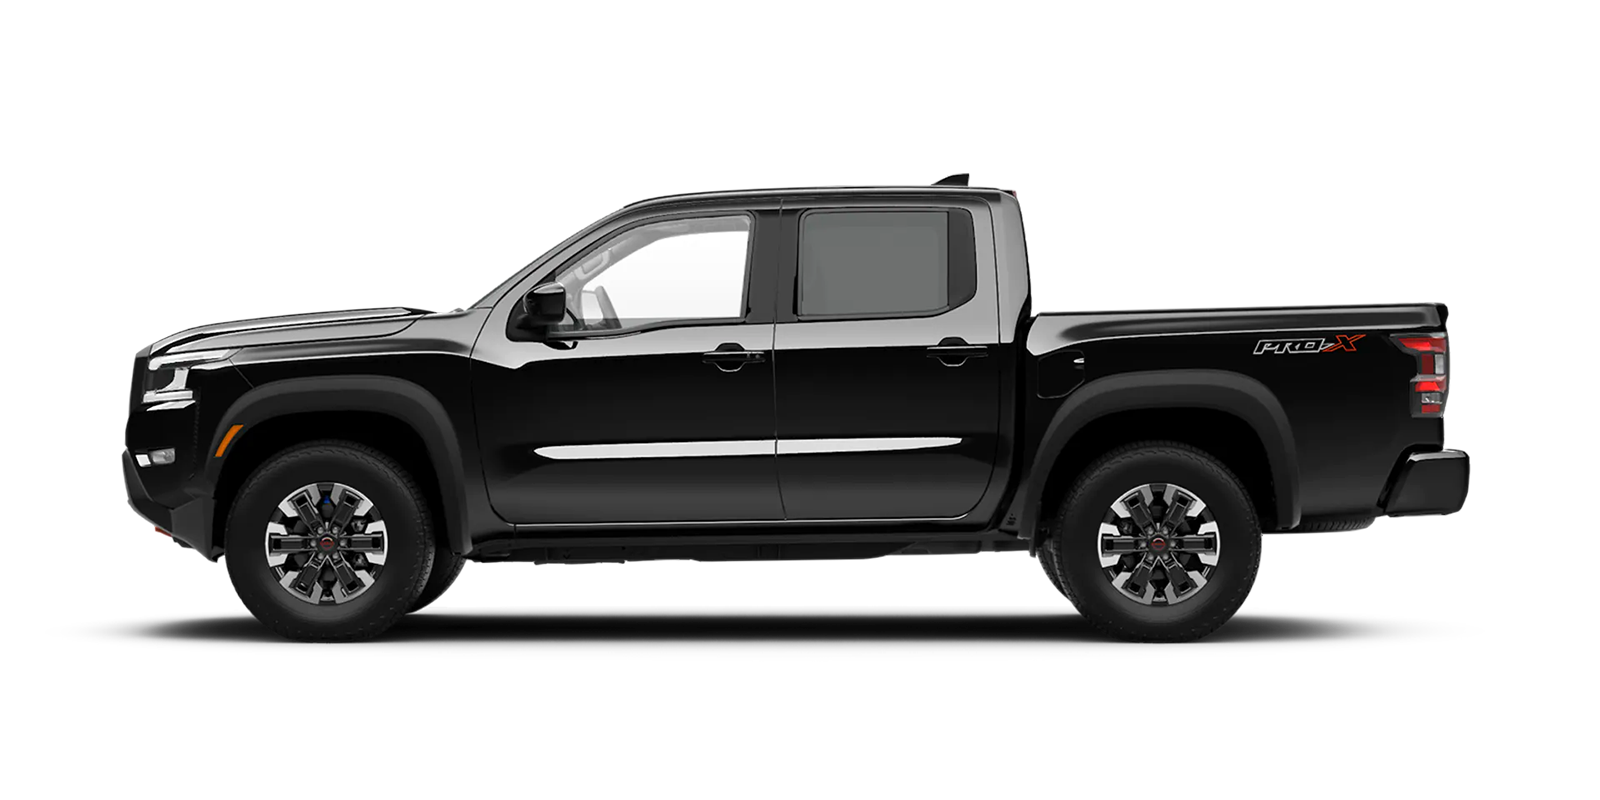 2022 Frontier Crew Cab Pro-X 4x2 in Super Black | Nissan of Pittsfield in Pittsfield MA